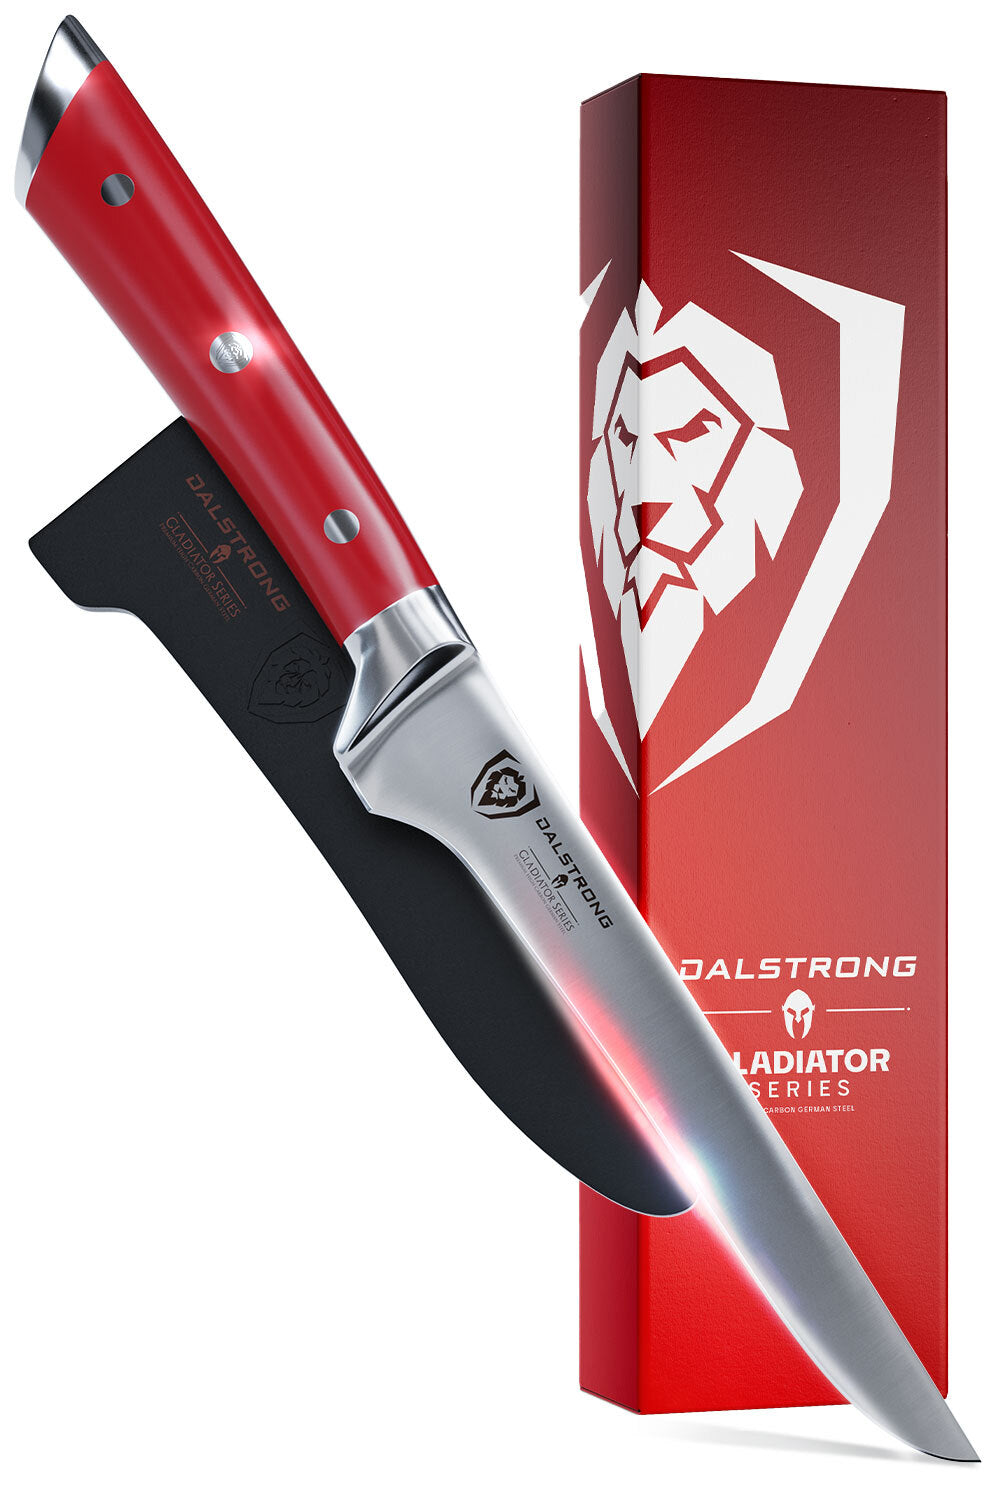 Dalstrong gladiator series 6 inch boning knife with red handle in front of it's premium packaging.